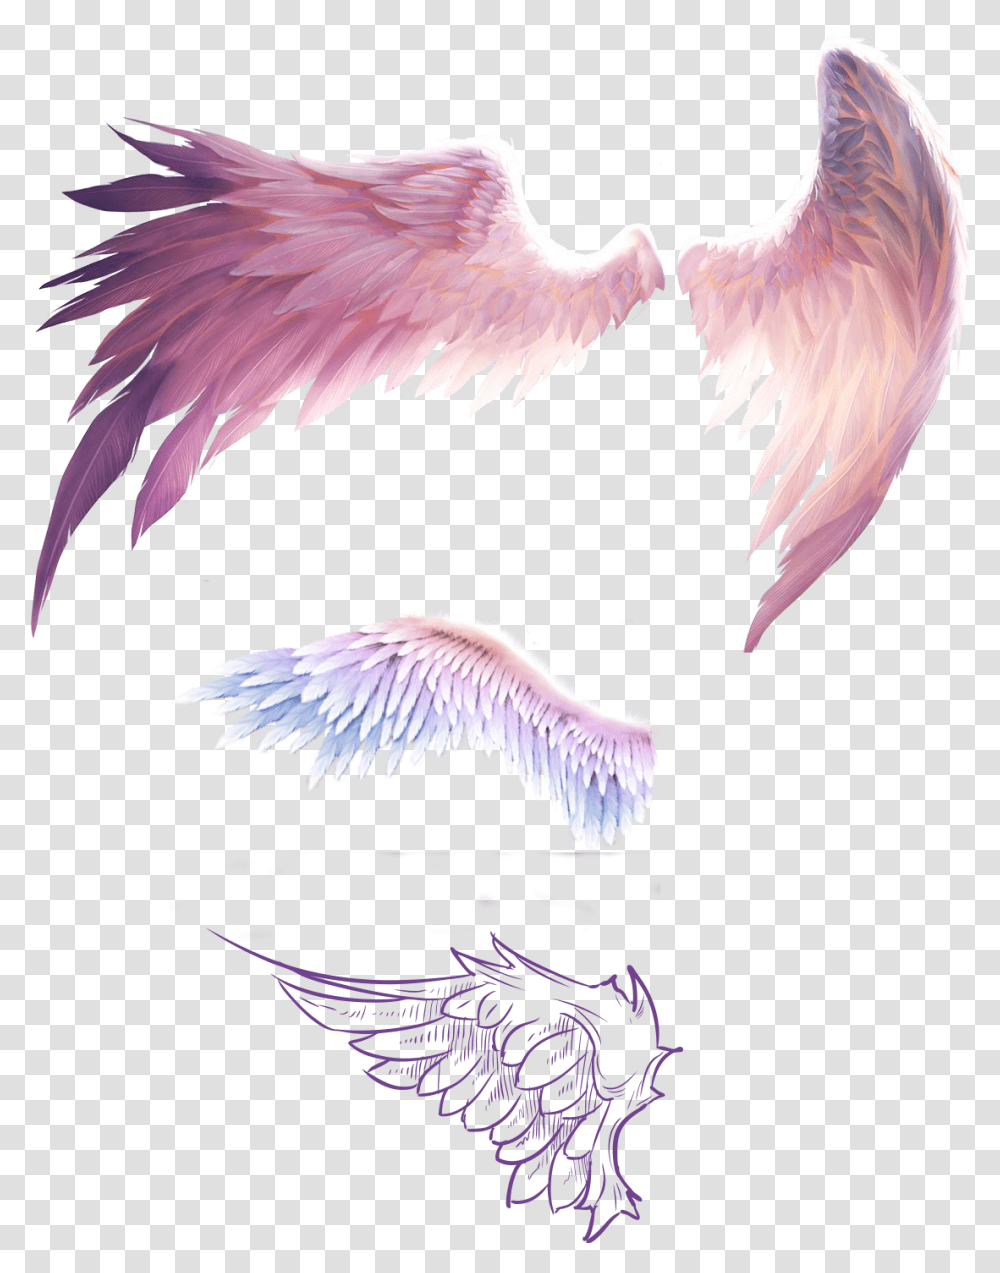 Fly Wings Free Downloadwings Picsart Anime Wings, Eagle, Bird, Animal, Vulture Transparent Png